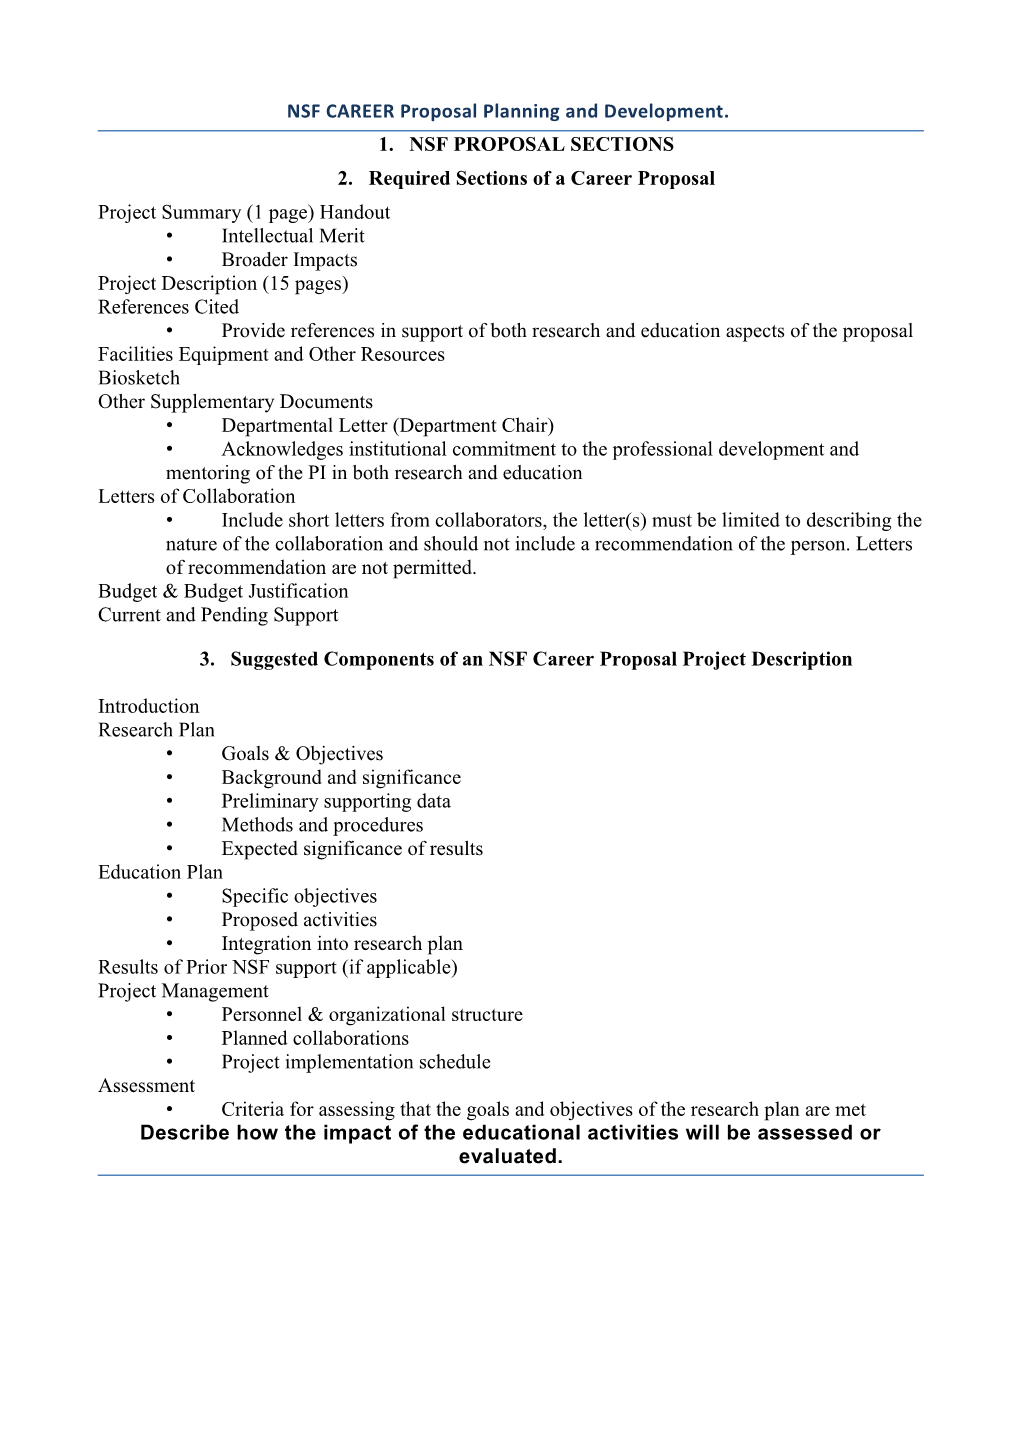 NSF CAREER Proposal Planning and Development